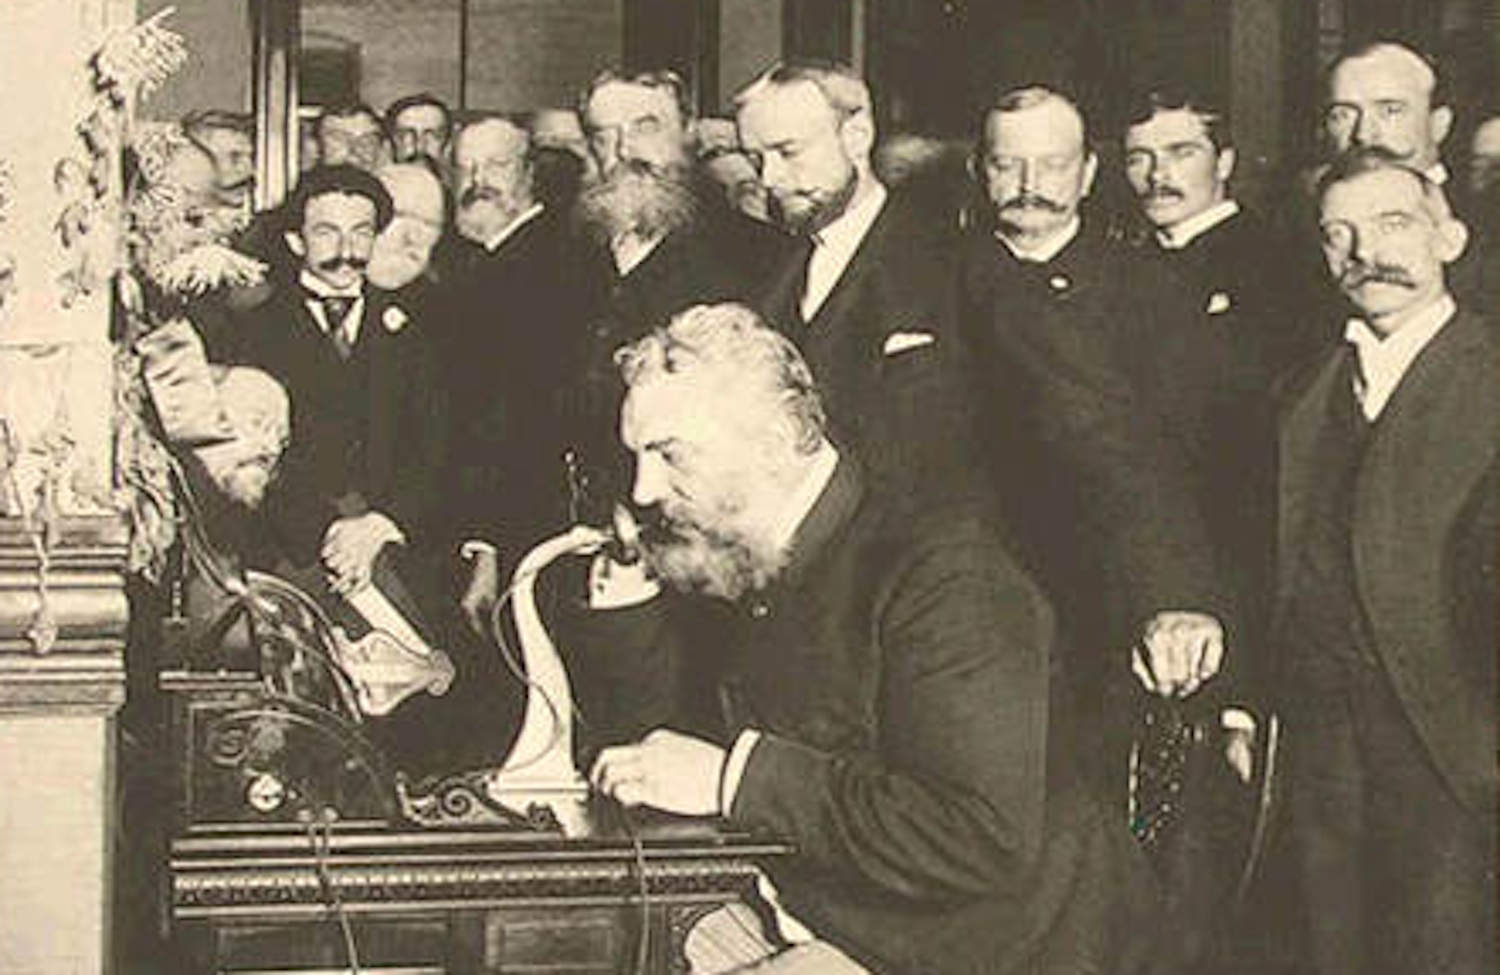 January 25, 1915: Alexander Graham Bell, in New York, Speaks on the Telephone With Thomas Watson, in San Francisco